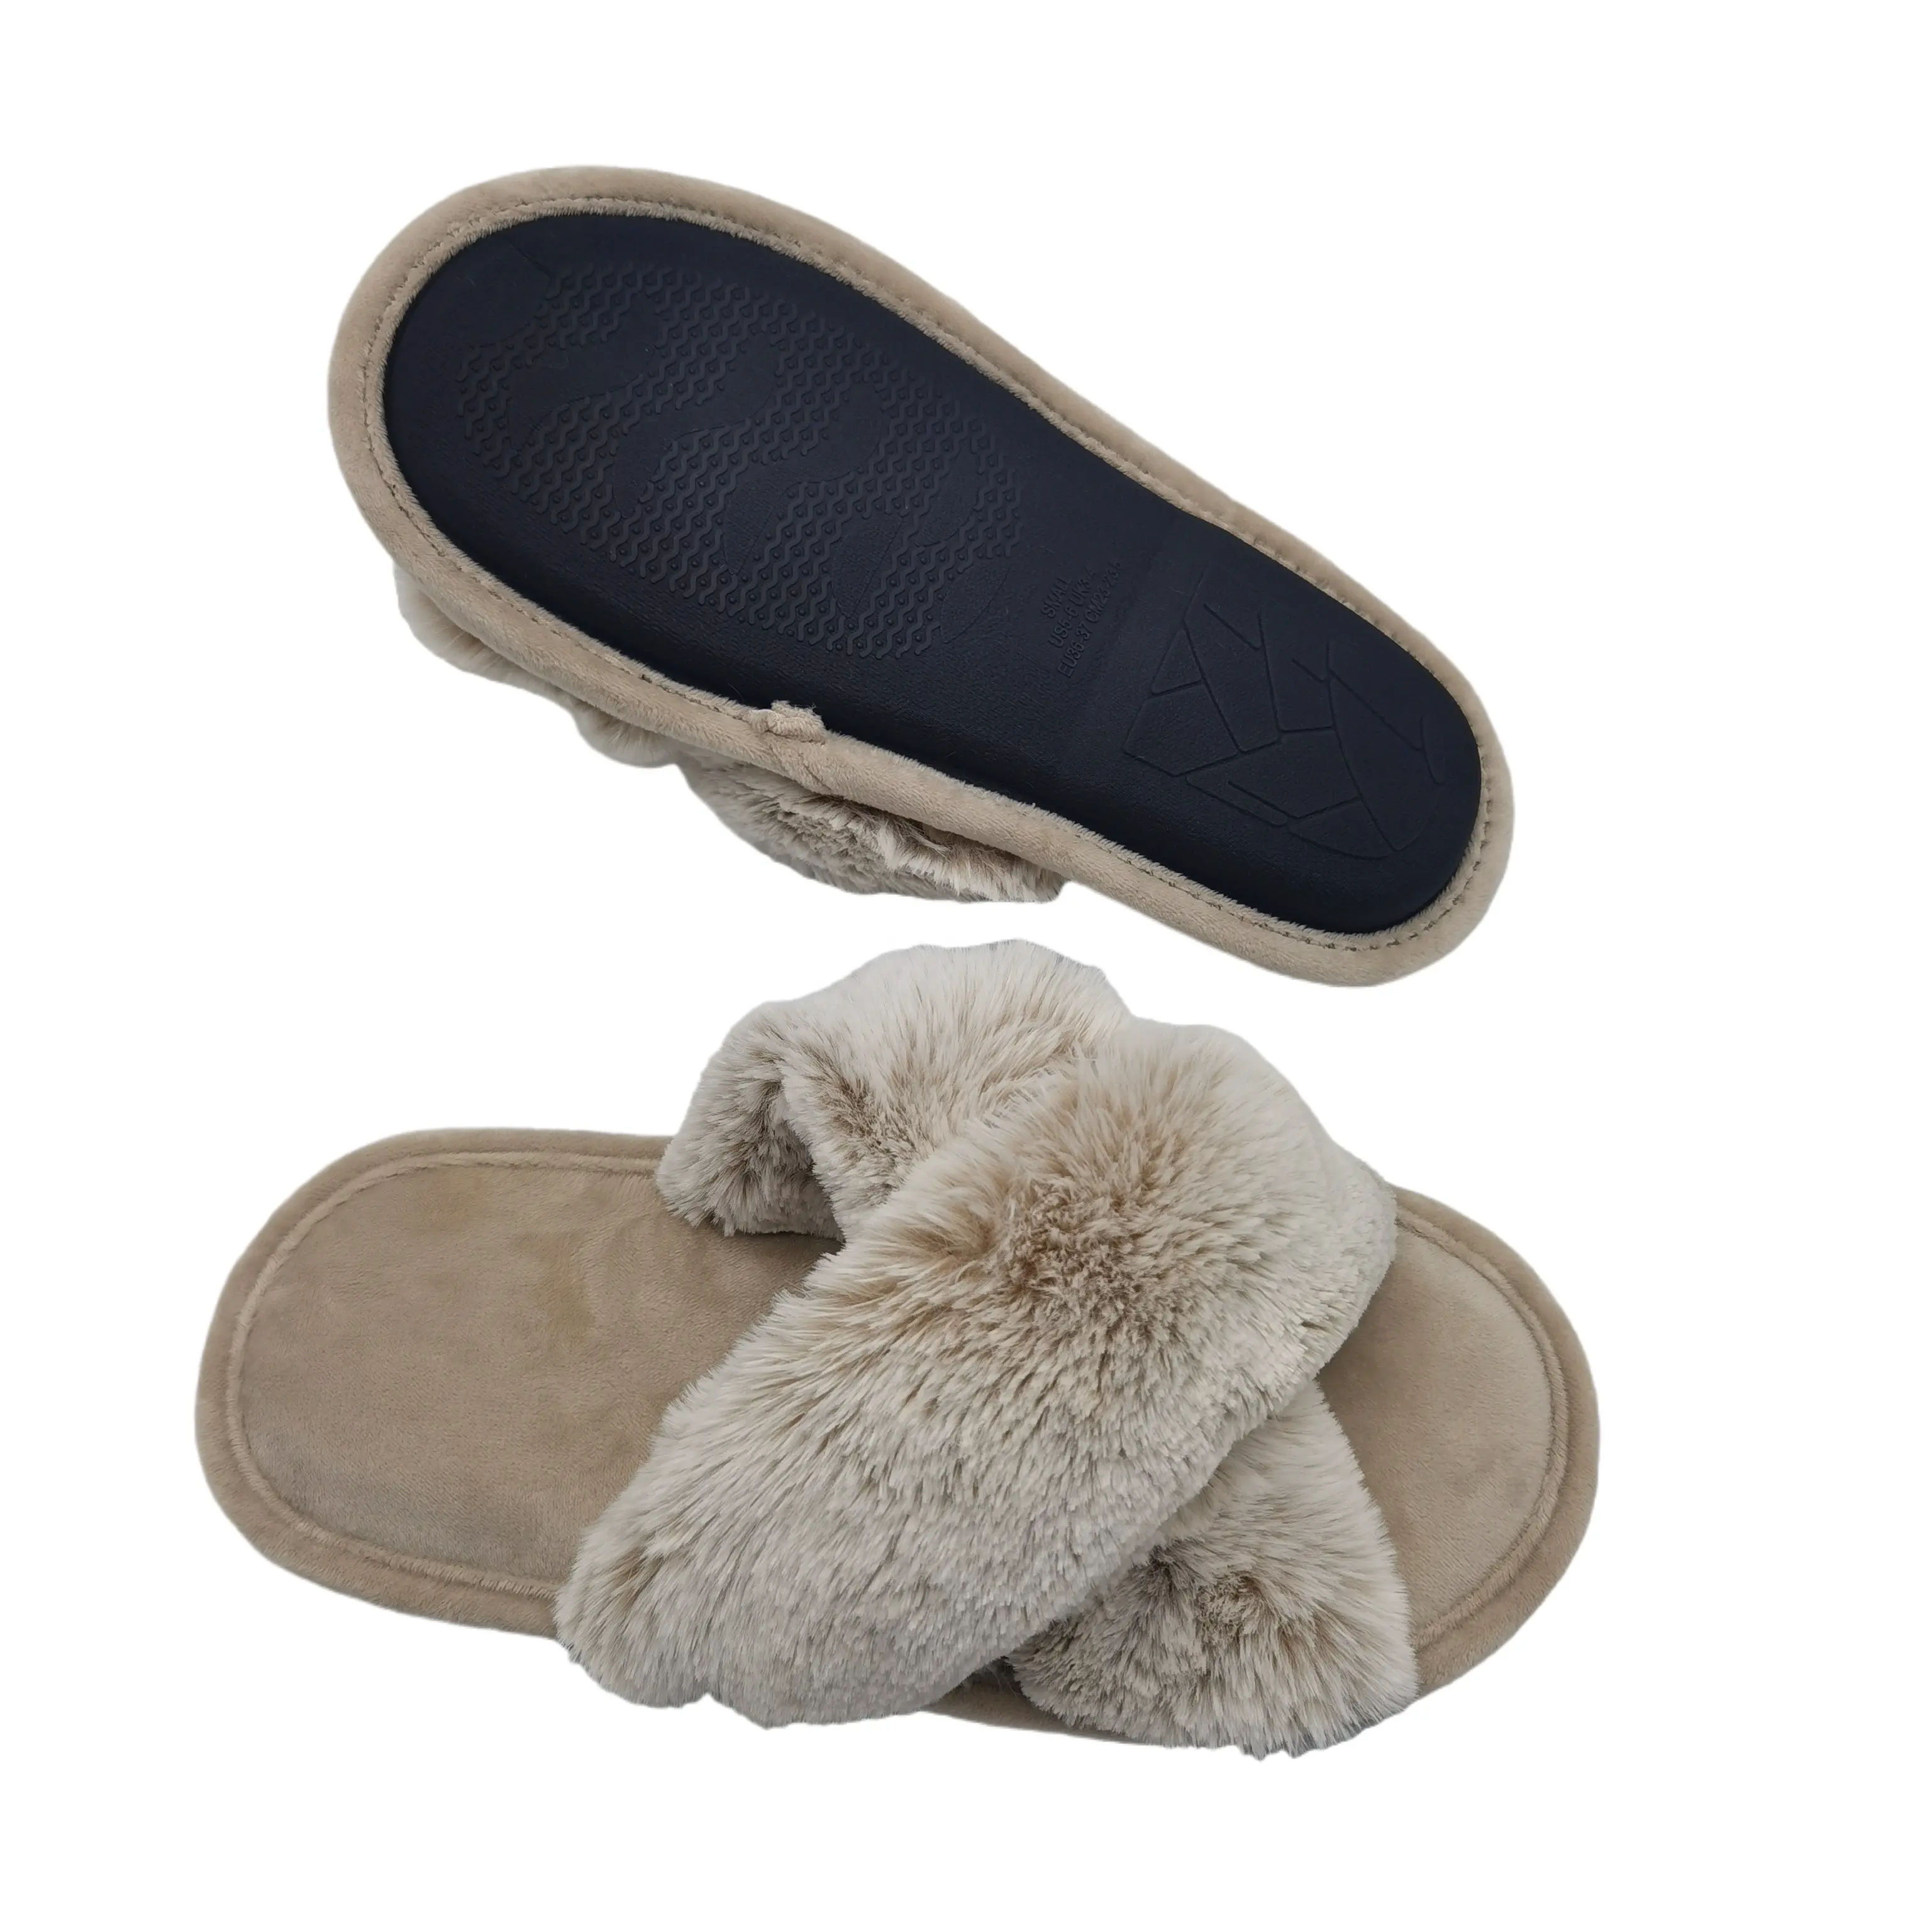 customized indoor slippers faux fur Winter Plush Furry Cross Band Open Toe TPR outsole Warm house bedroom Slippers for women